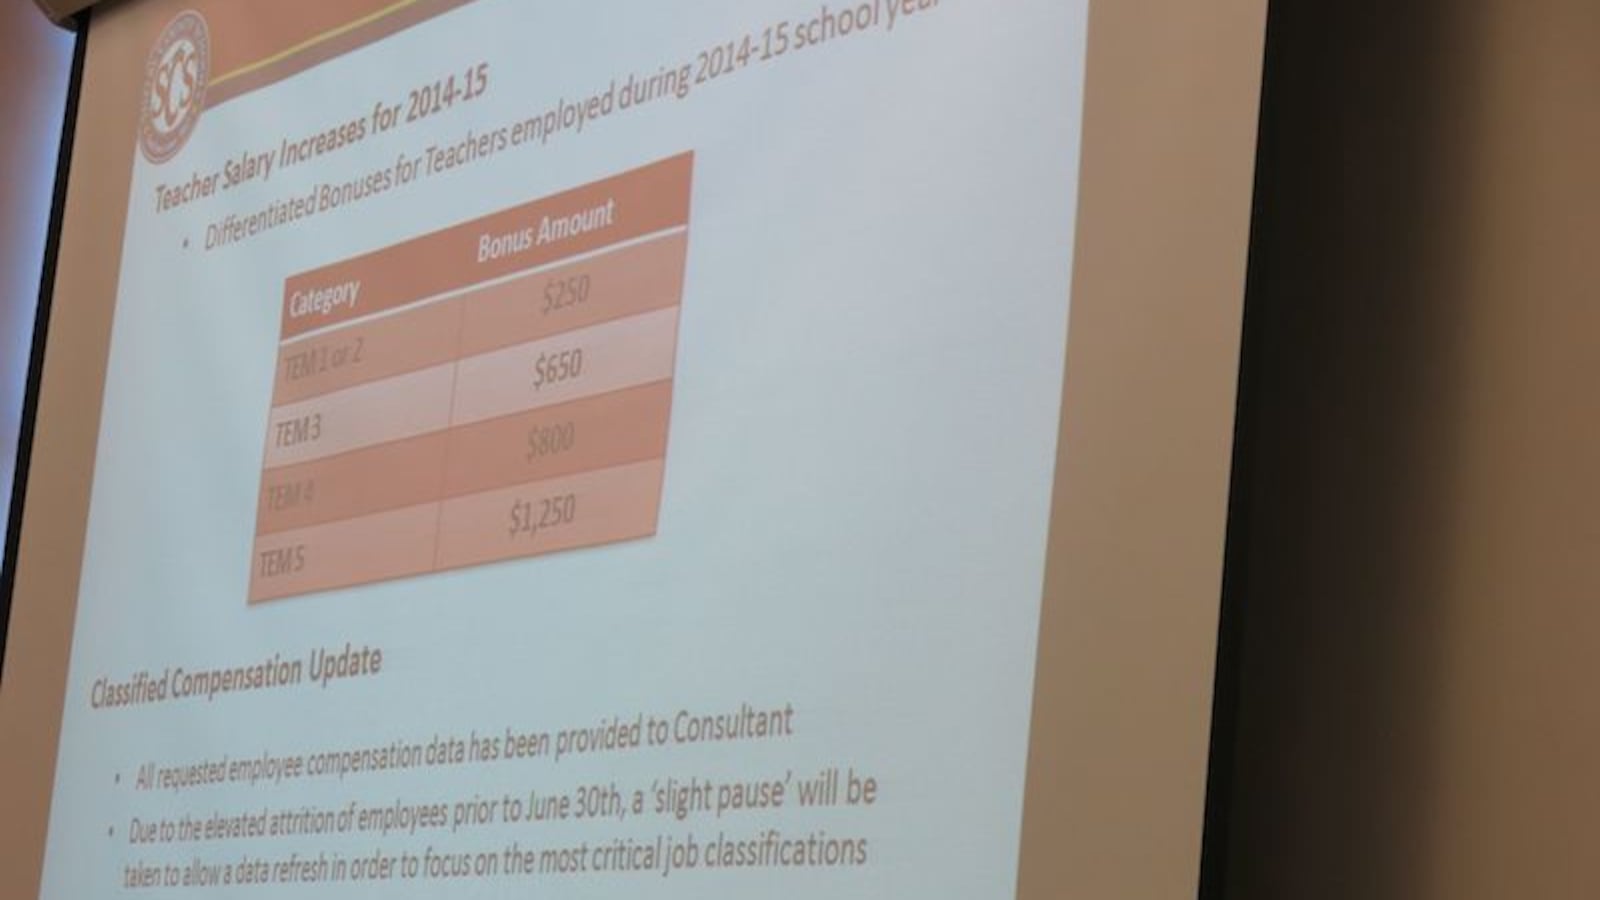 Shelby County School leaders presented its bonus pay plan for the districts teachers based on last year's evaluation scores.  All teachers will receive a bonus, but not a cost of living raise.